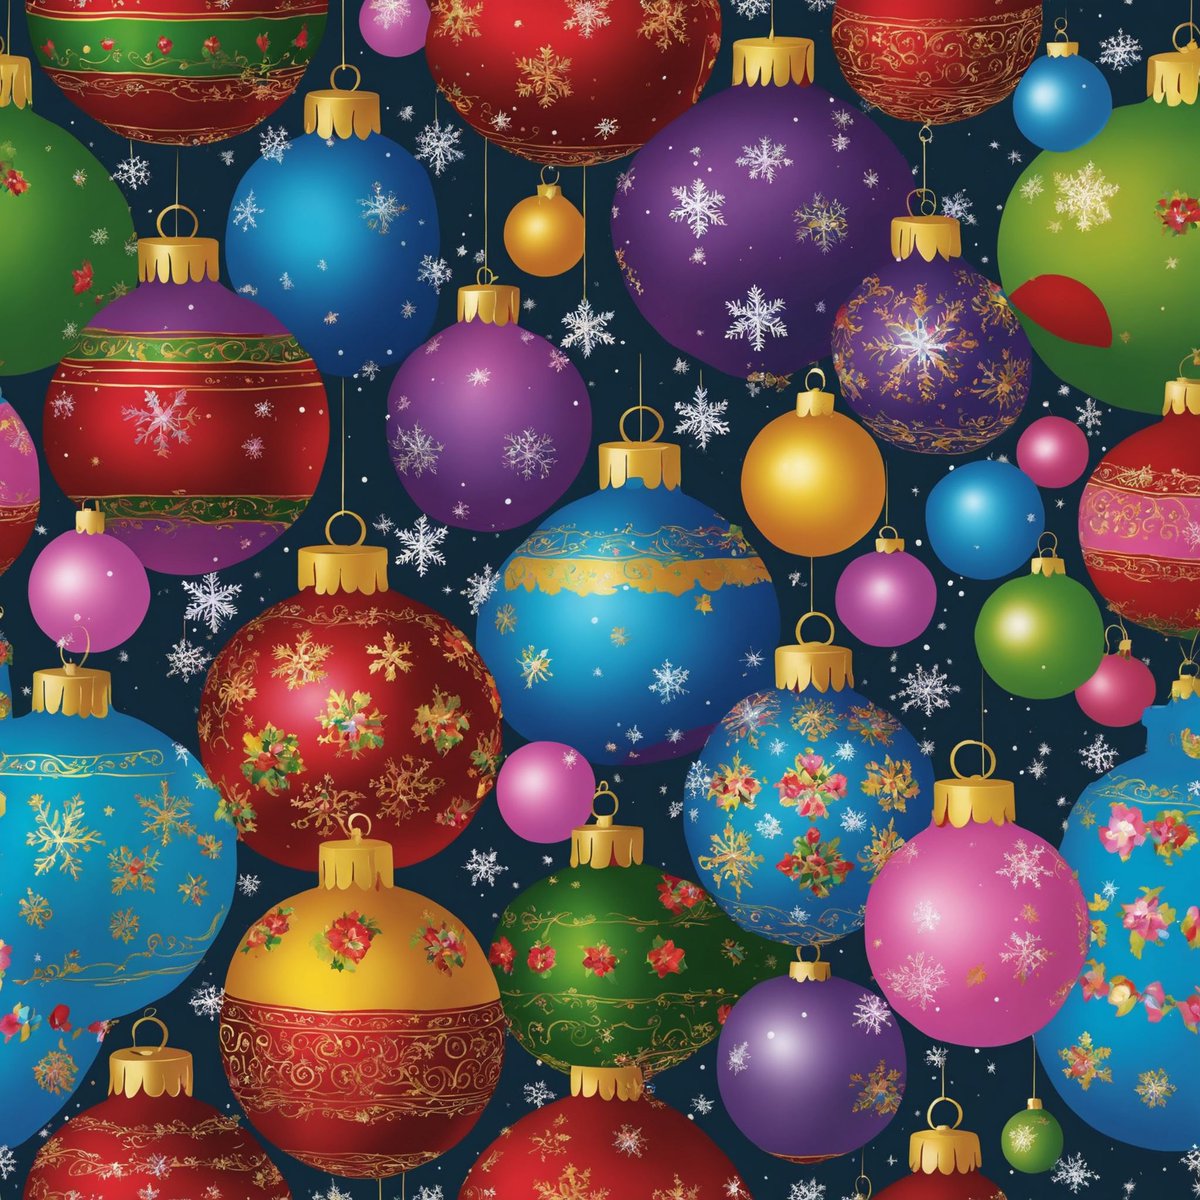 A kaleidoscope of Christmas baubles! Each ornament bursts with festive patterns, creating a tapestry of holiday spirit. A true mosaic of Yuletide joy. #ChristmasMagic #FestiveArt #OrnamentalBeauty